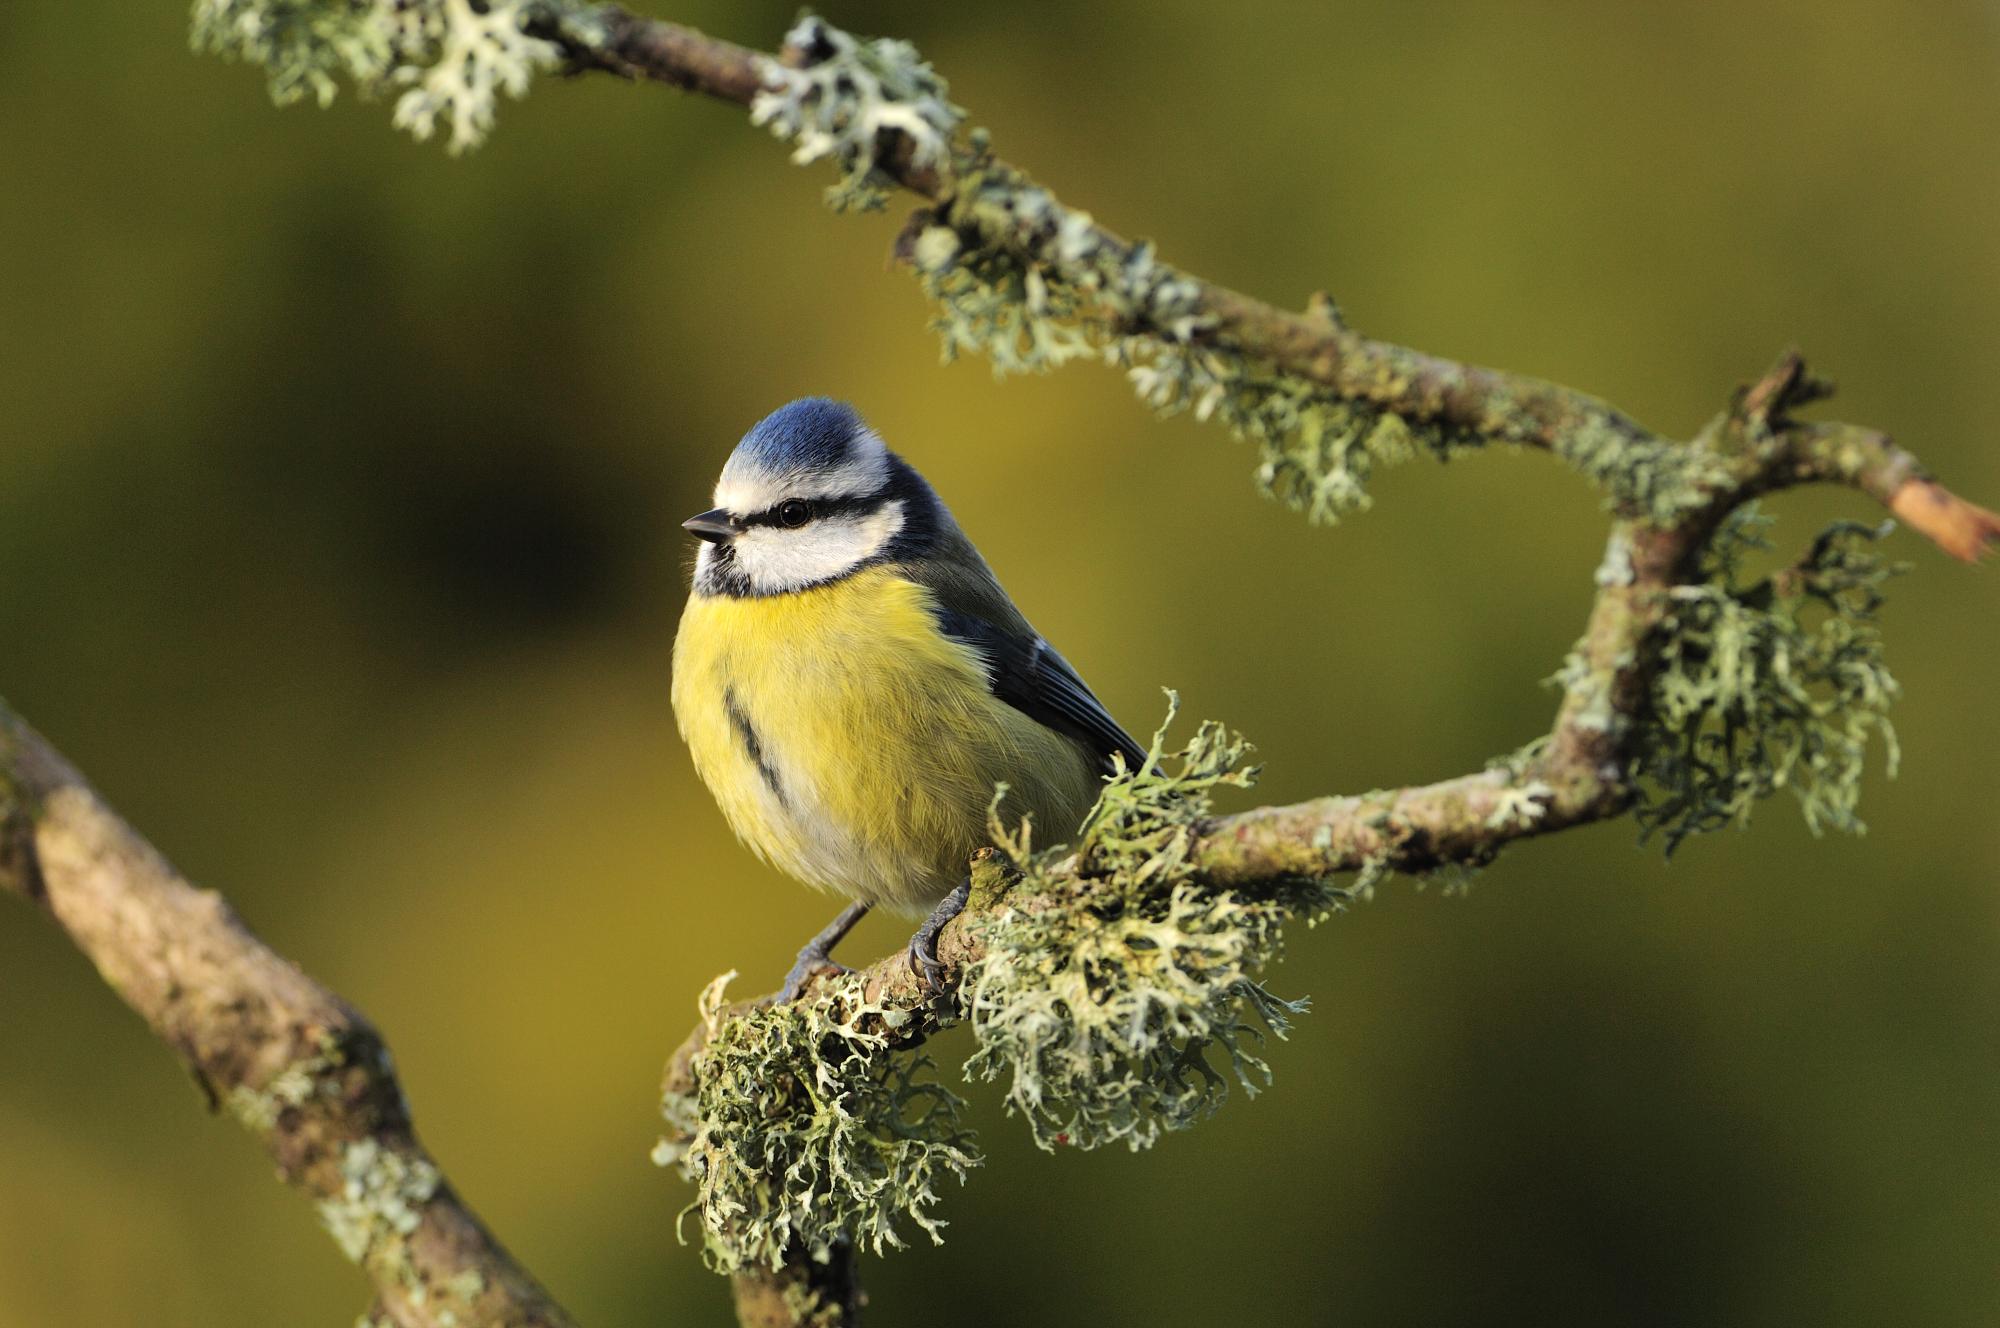 Blue tit (Cyanistes caeruleus) perching on a lichen covered branch.